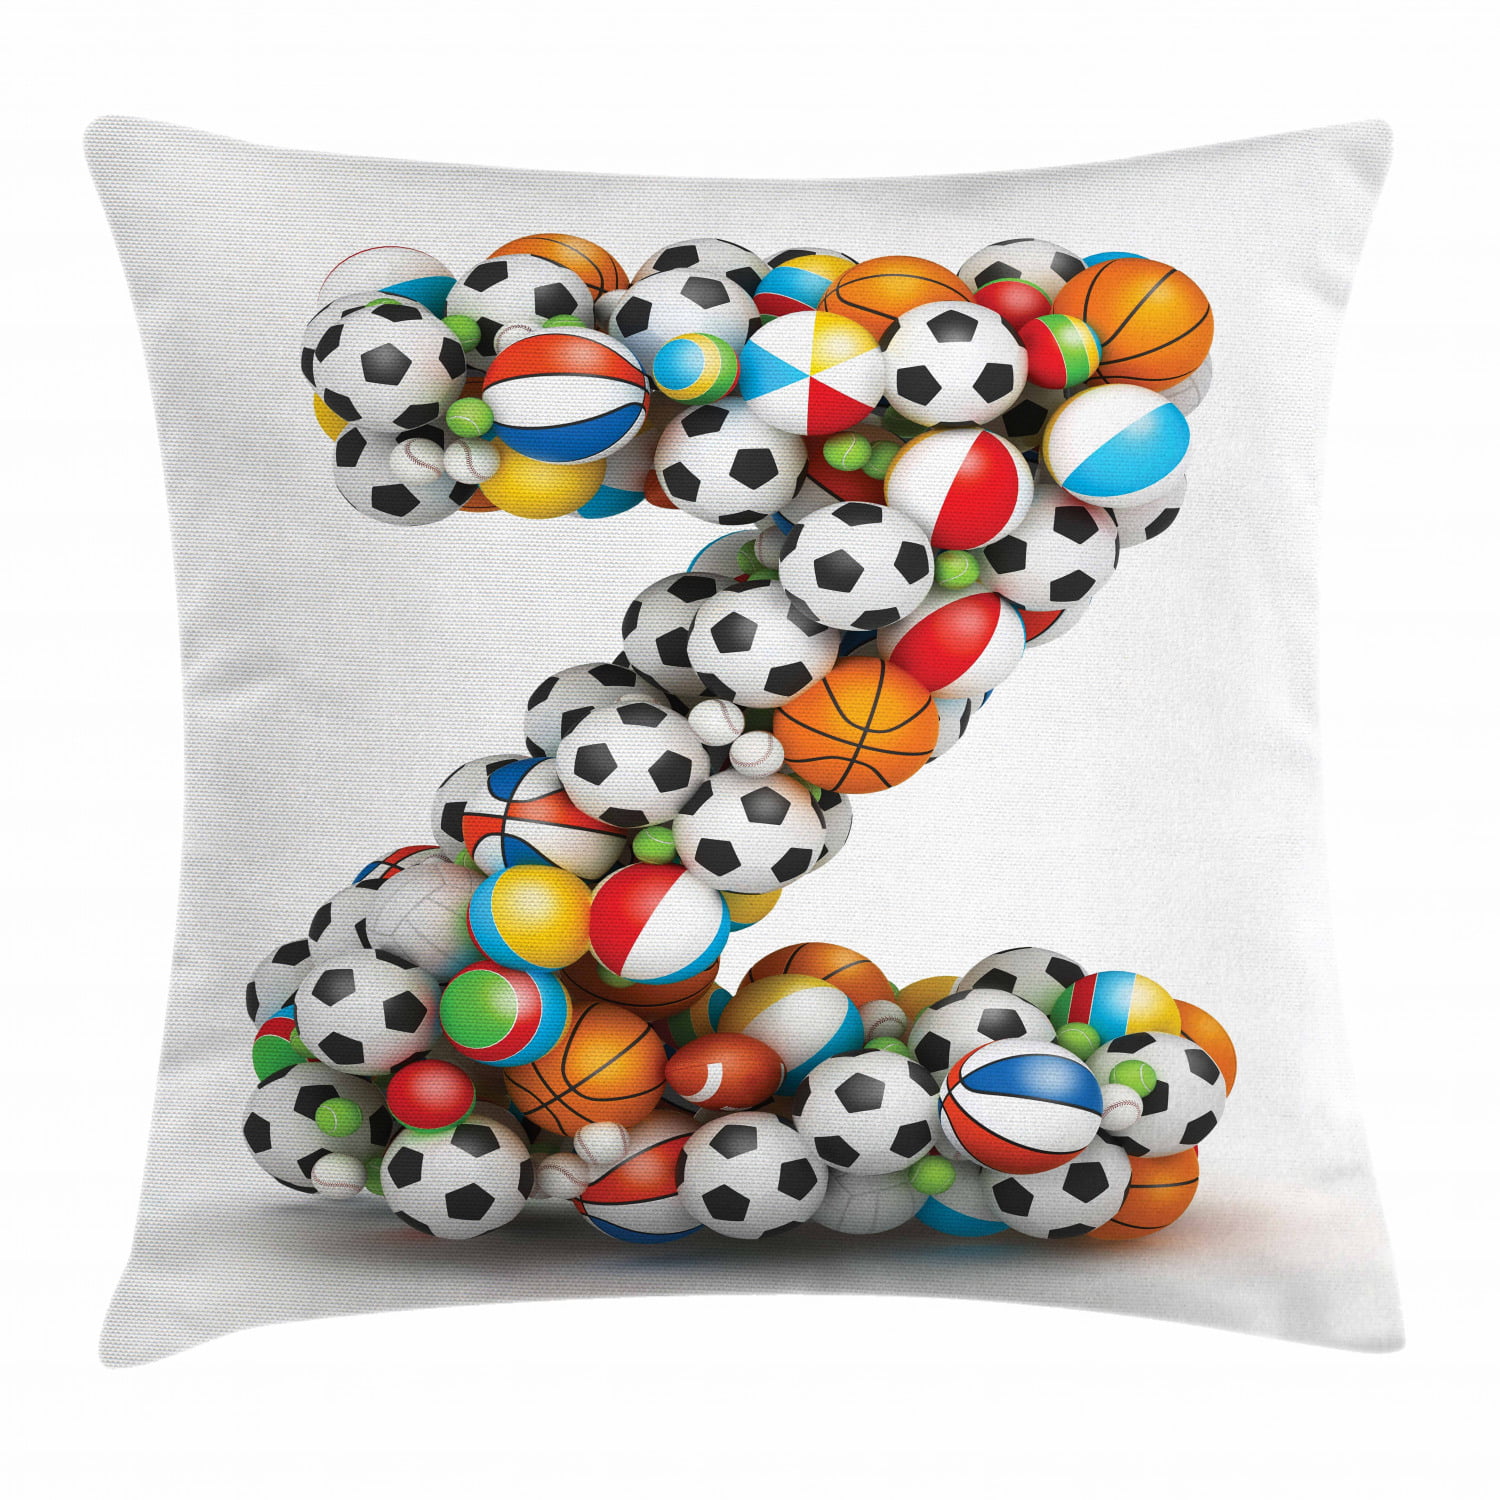 Hidden Zipper Home Gift Double Side Print Pillow Cover & Pillow Set Coral Tire Track Design Square Pillow